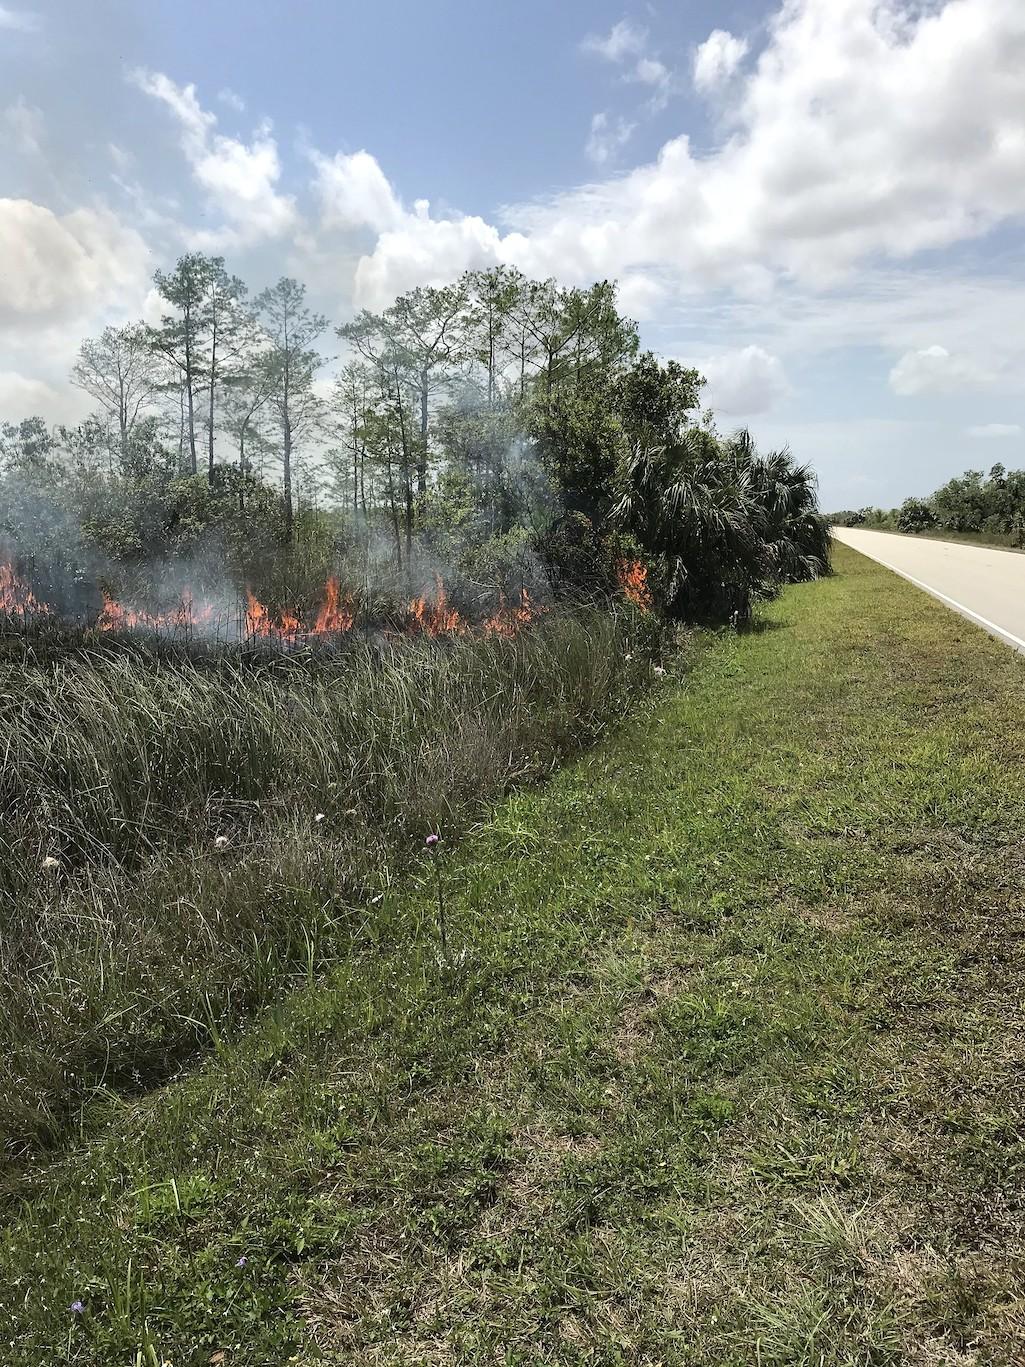 A $10,000 reward is being offered for information leading to the conviction of those responsible for starting fires in Everglades National Park/NPS